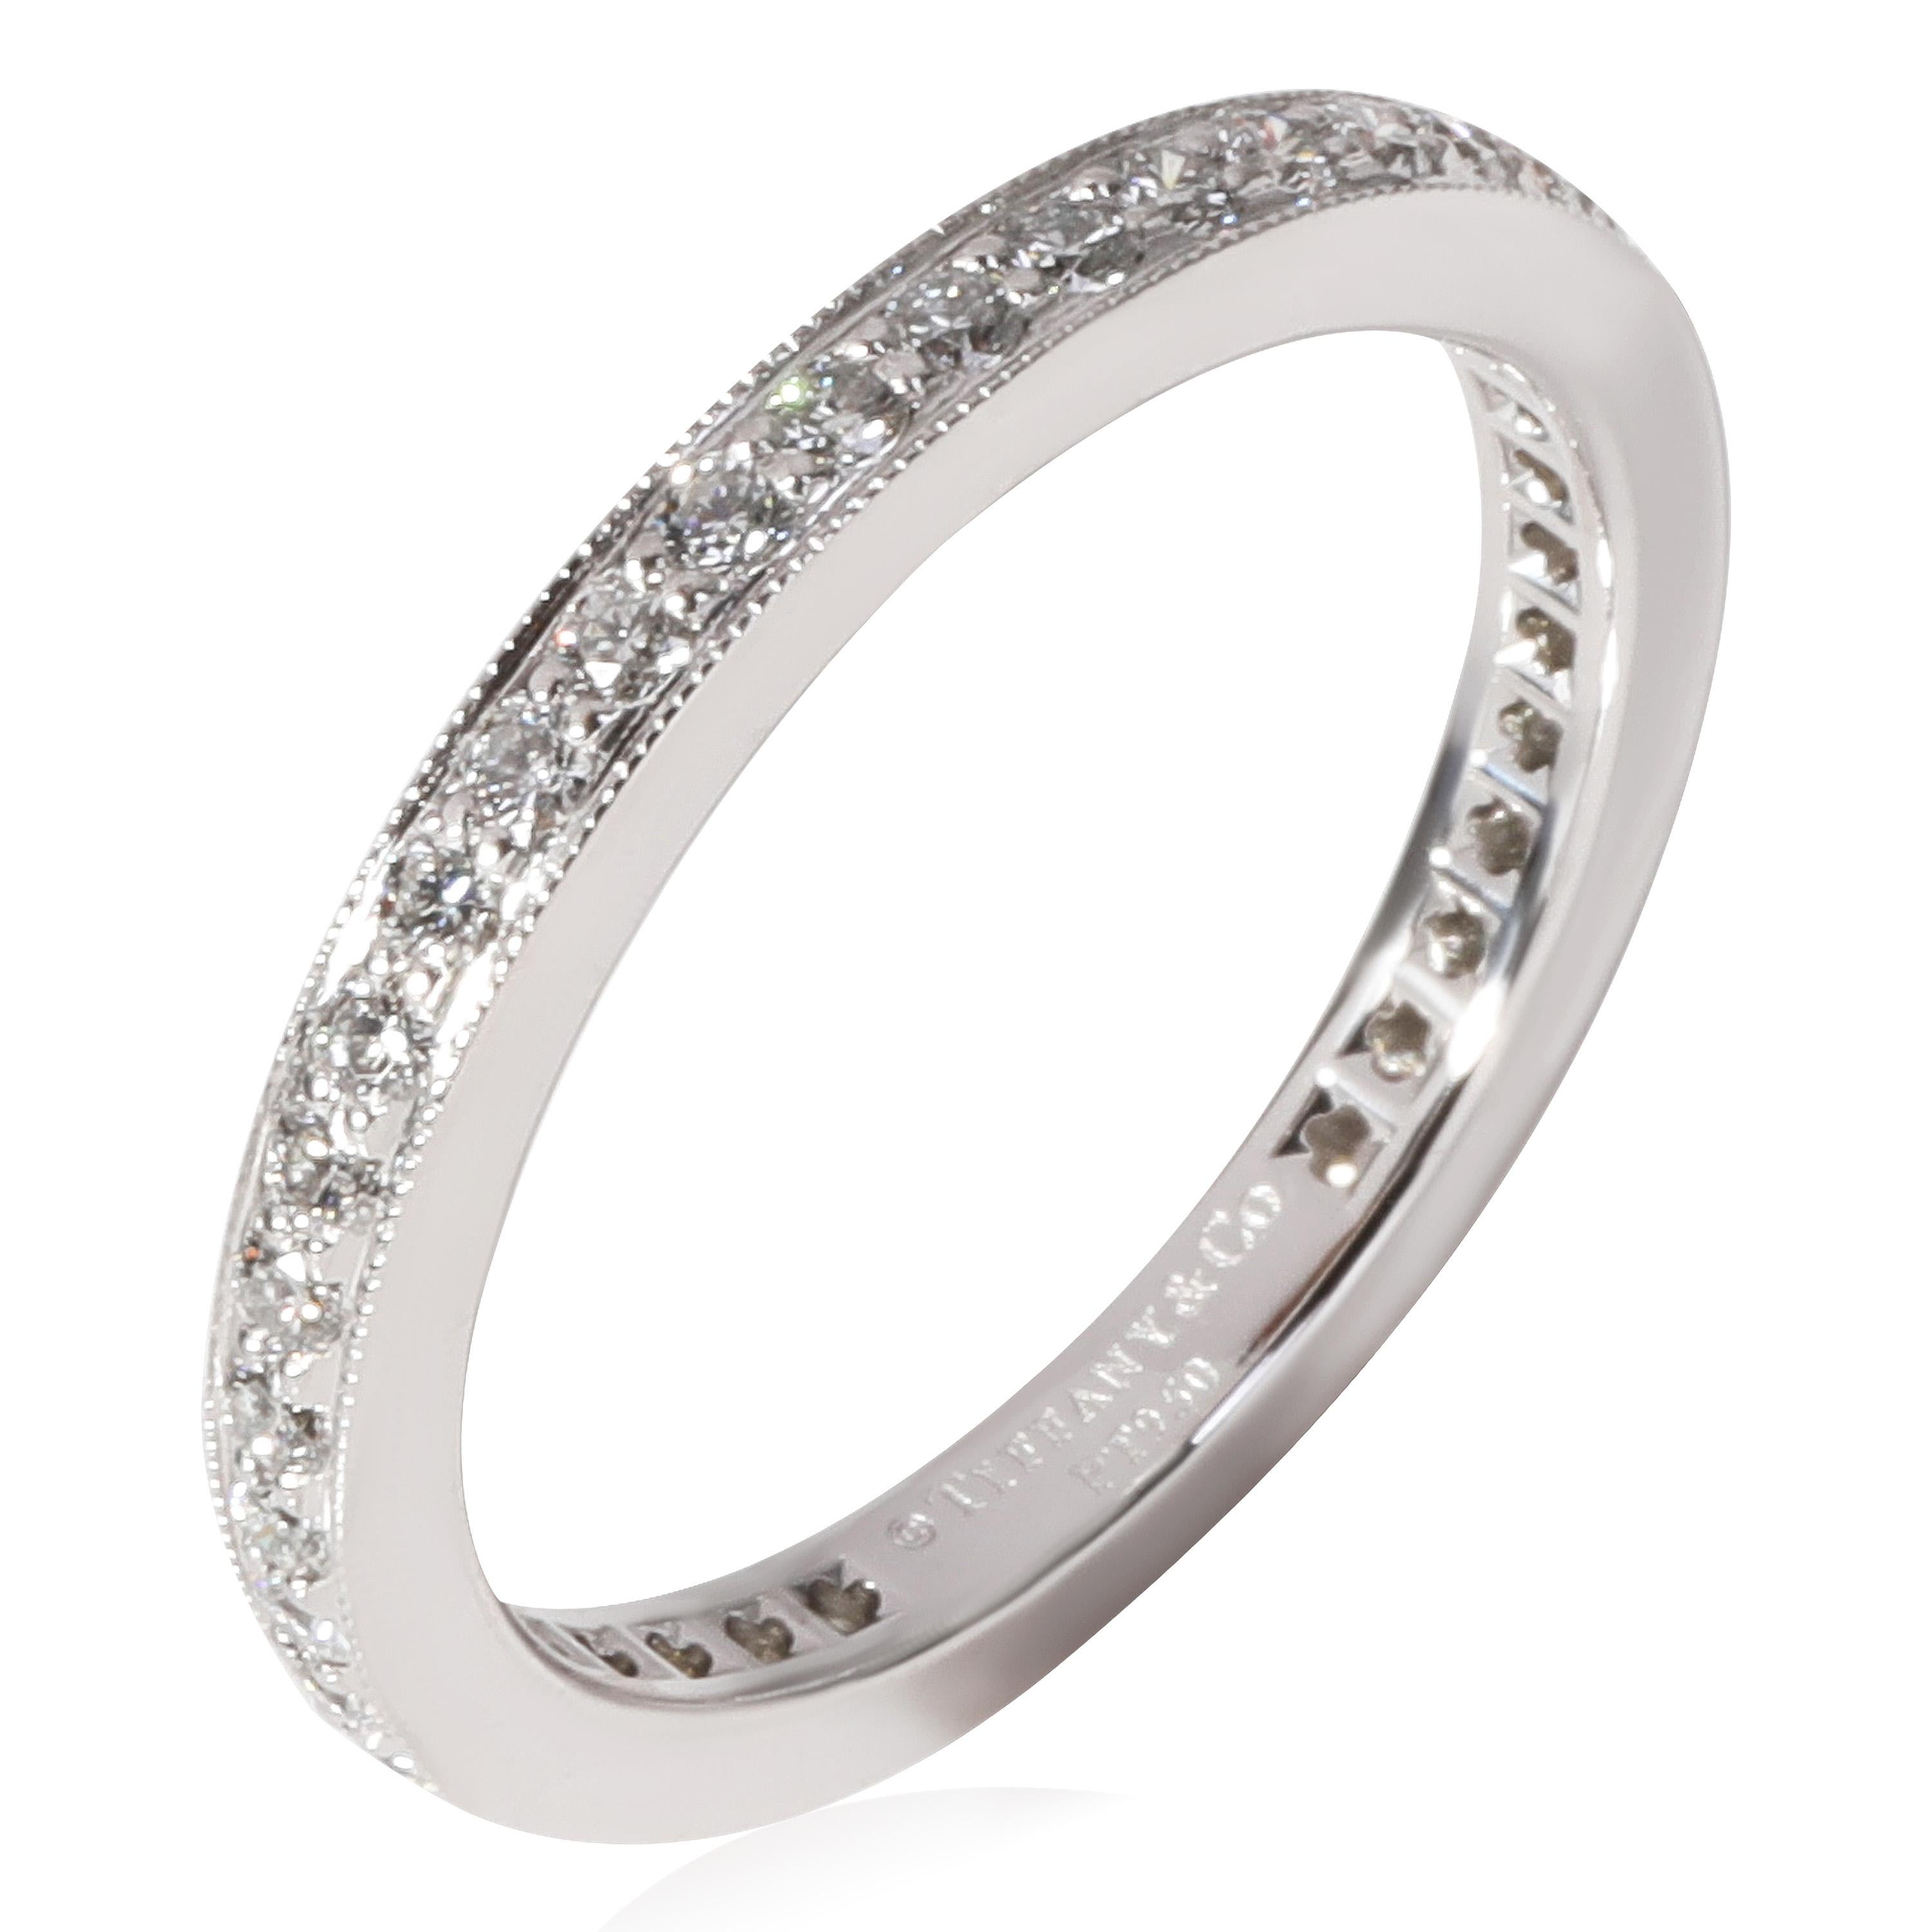 Tiffany & Co. Legacy Diamond Eternity Band in Platinum 0.45 CTW In Excellent Condition For Sale In New York, NY